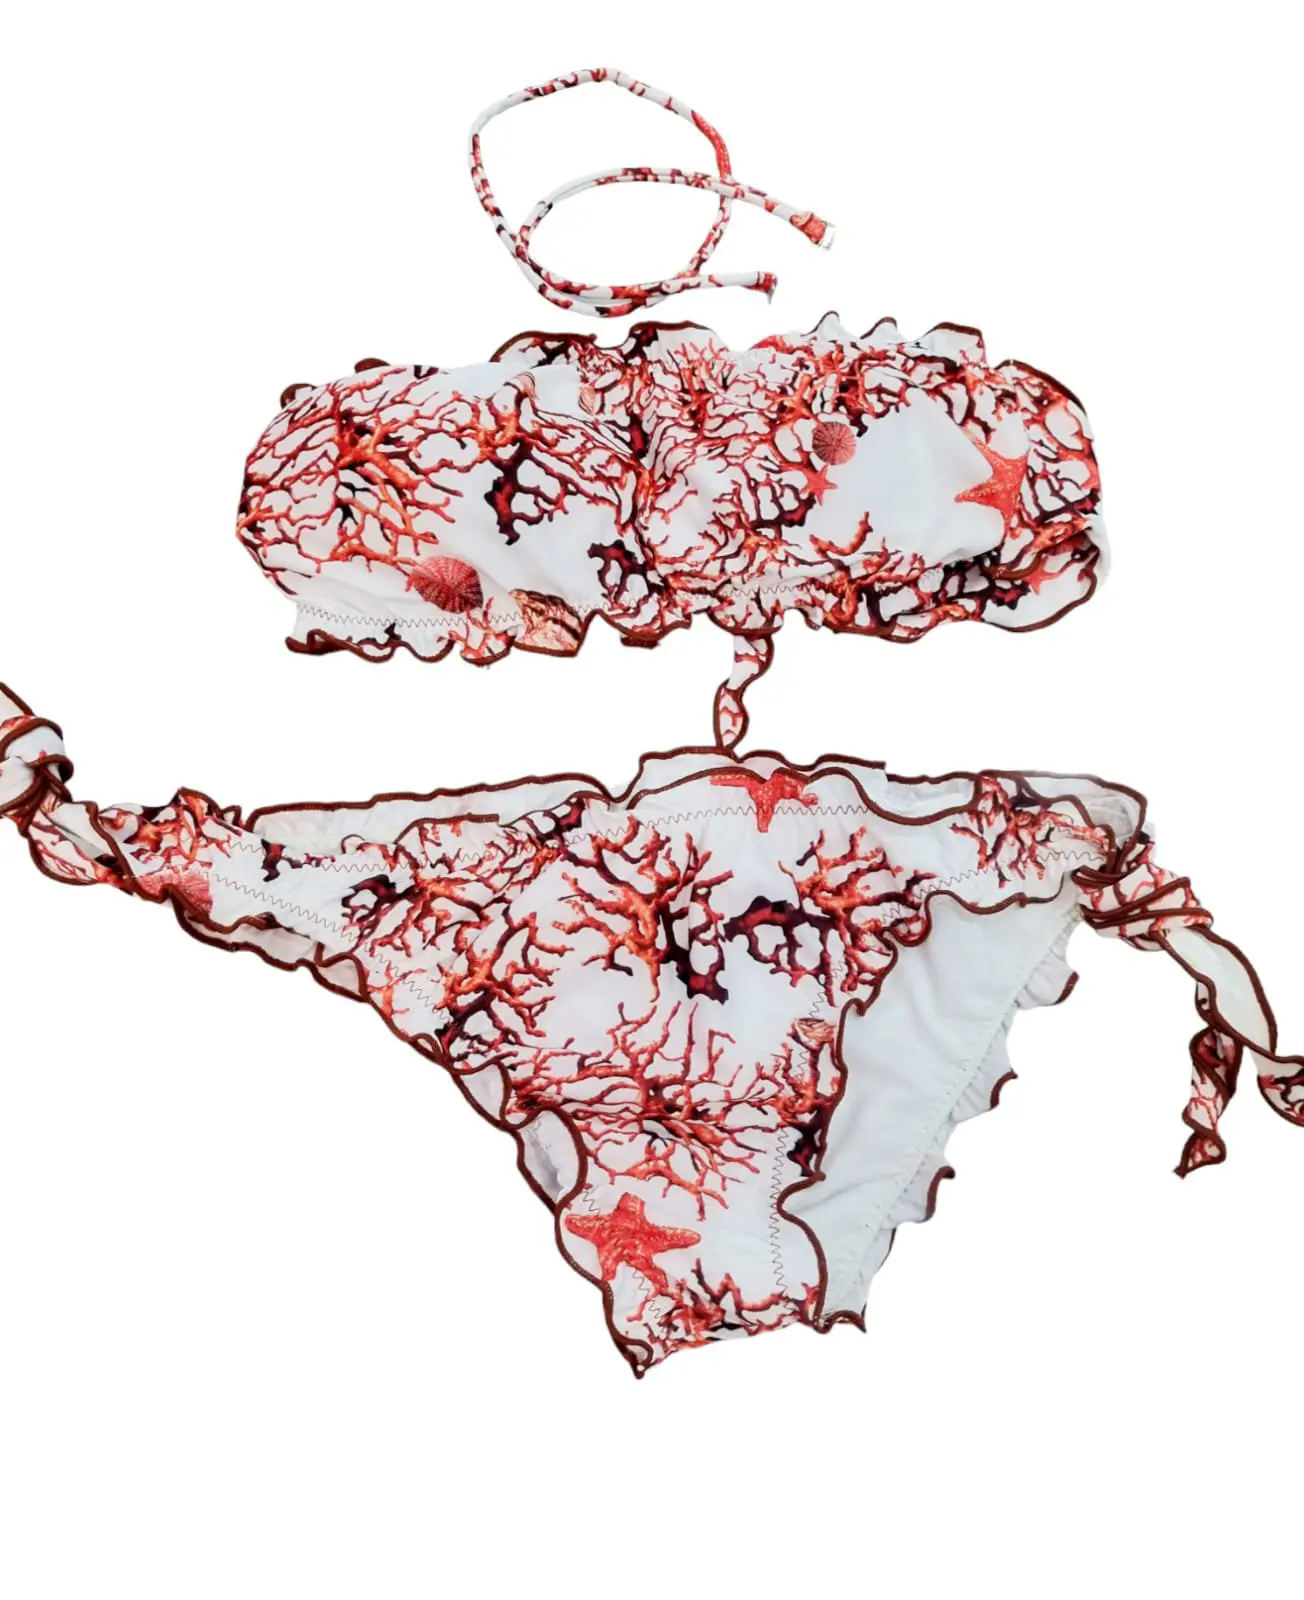 Padded bandeau bikini, possibility of adding a strap, adjustable briefs with curls. Red coral pattern